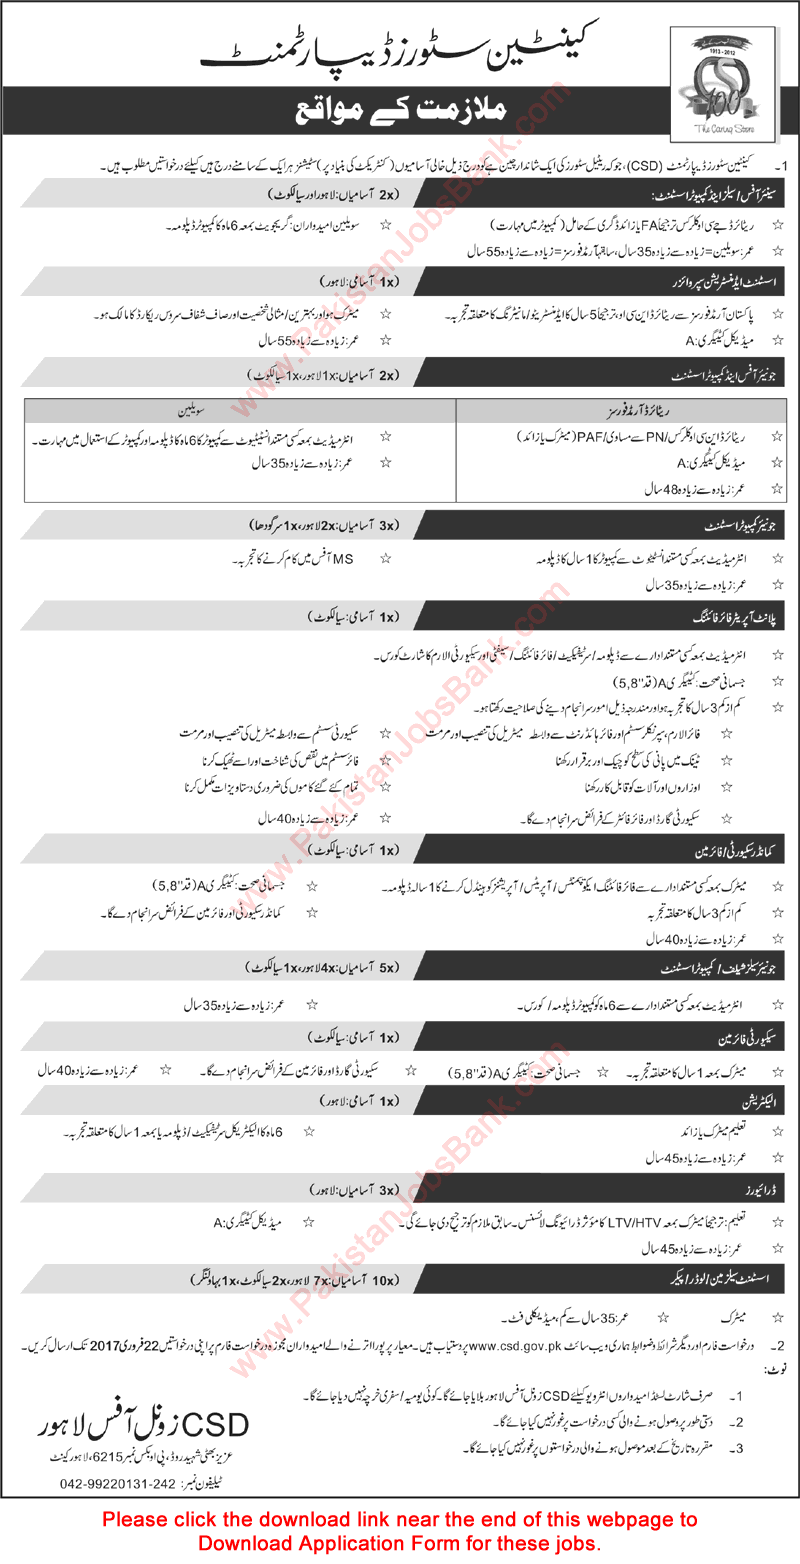 CSD Jobs February 2017 Canteen Stores Department Application Form Download Latest